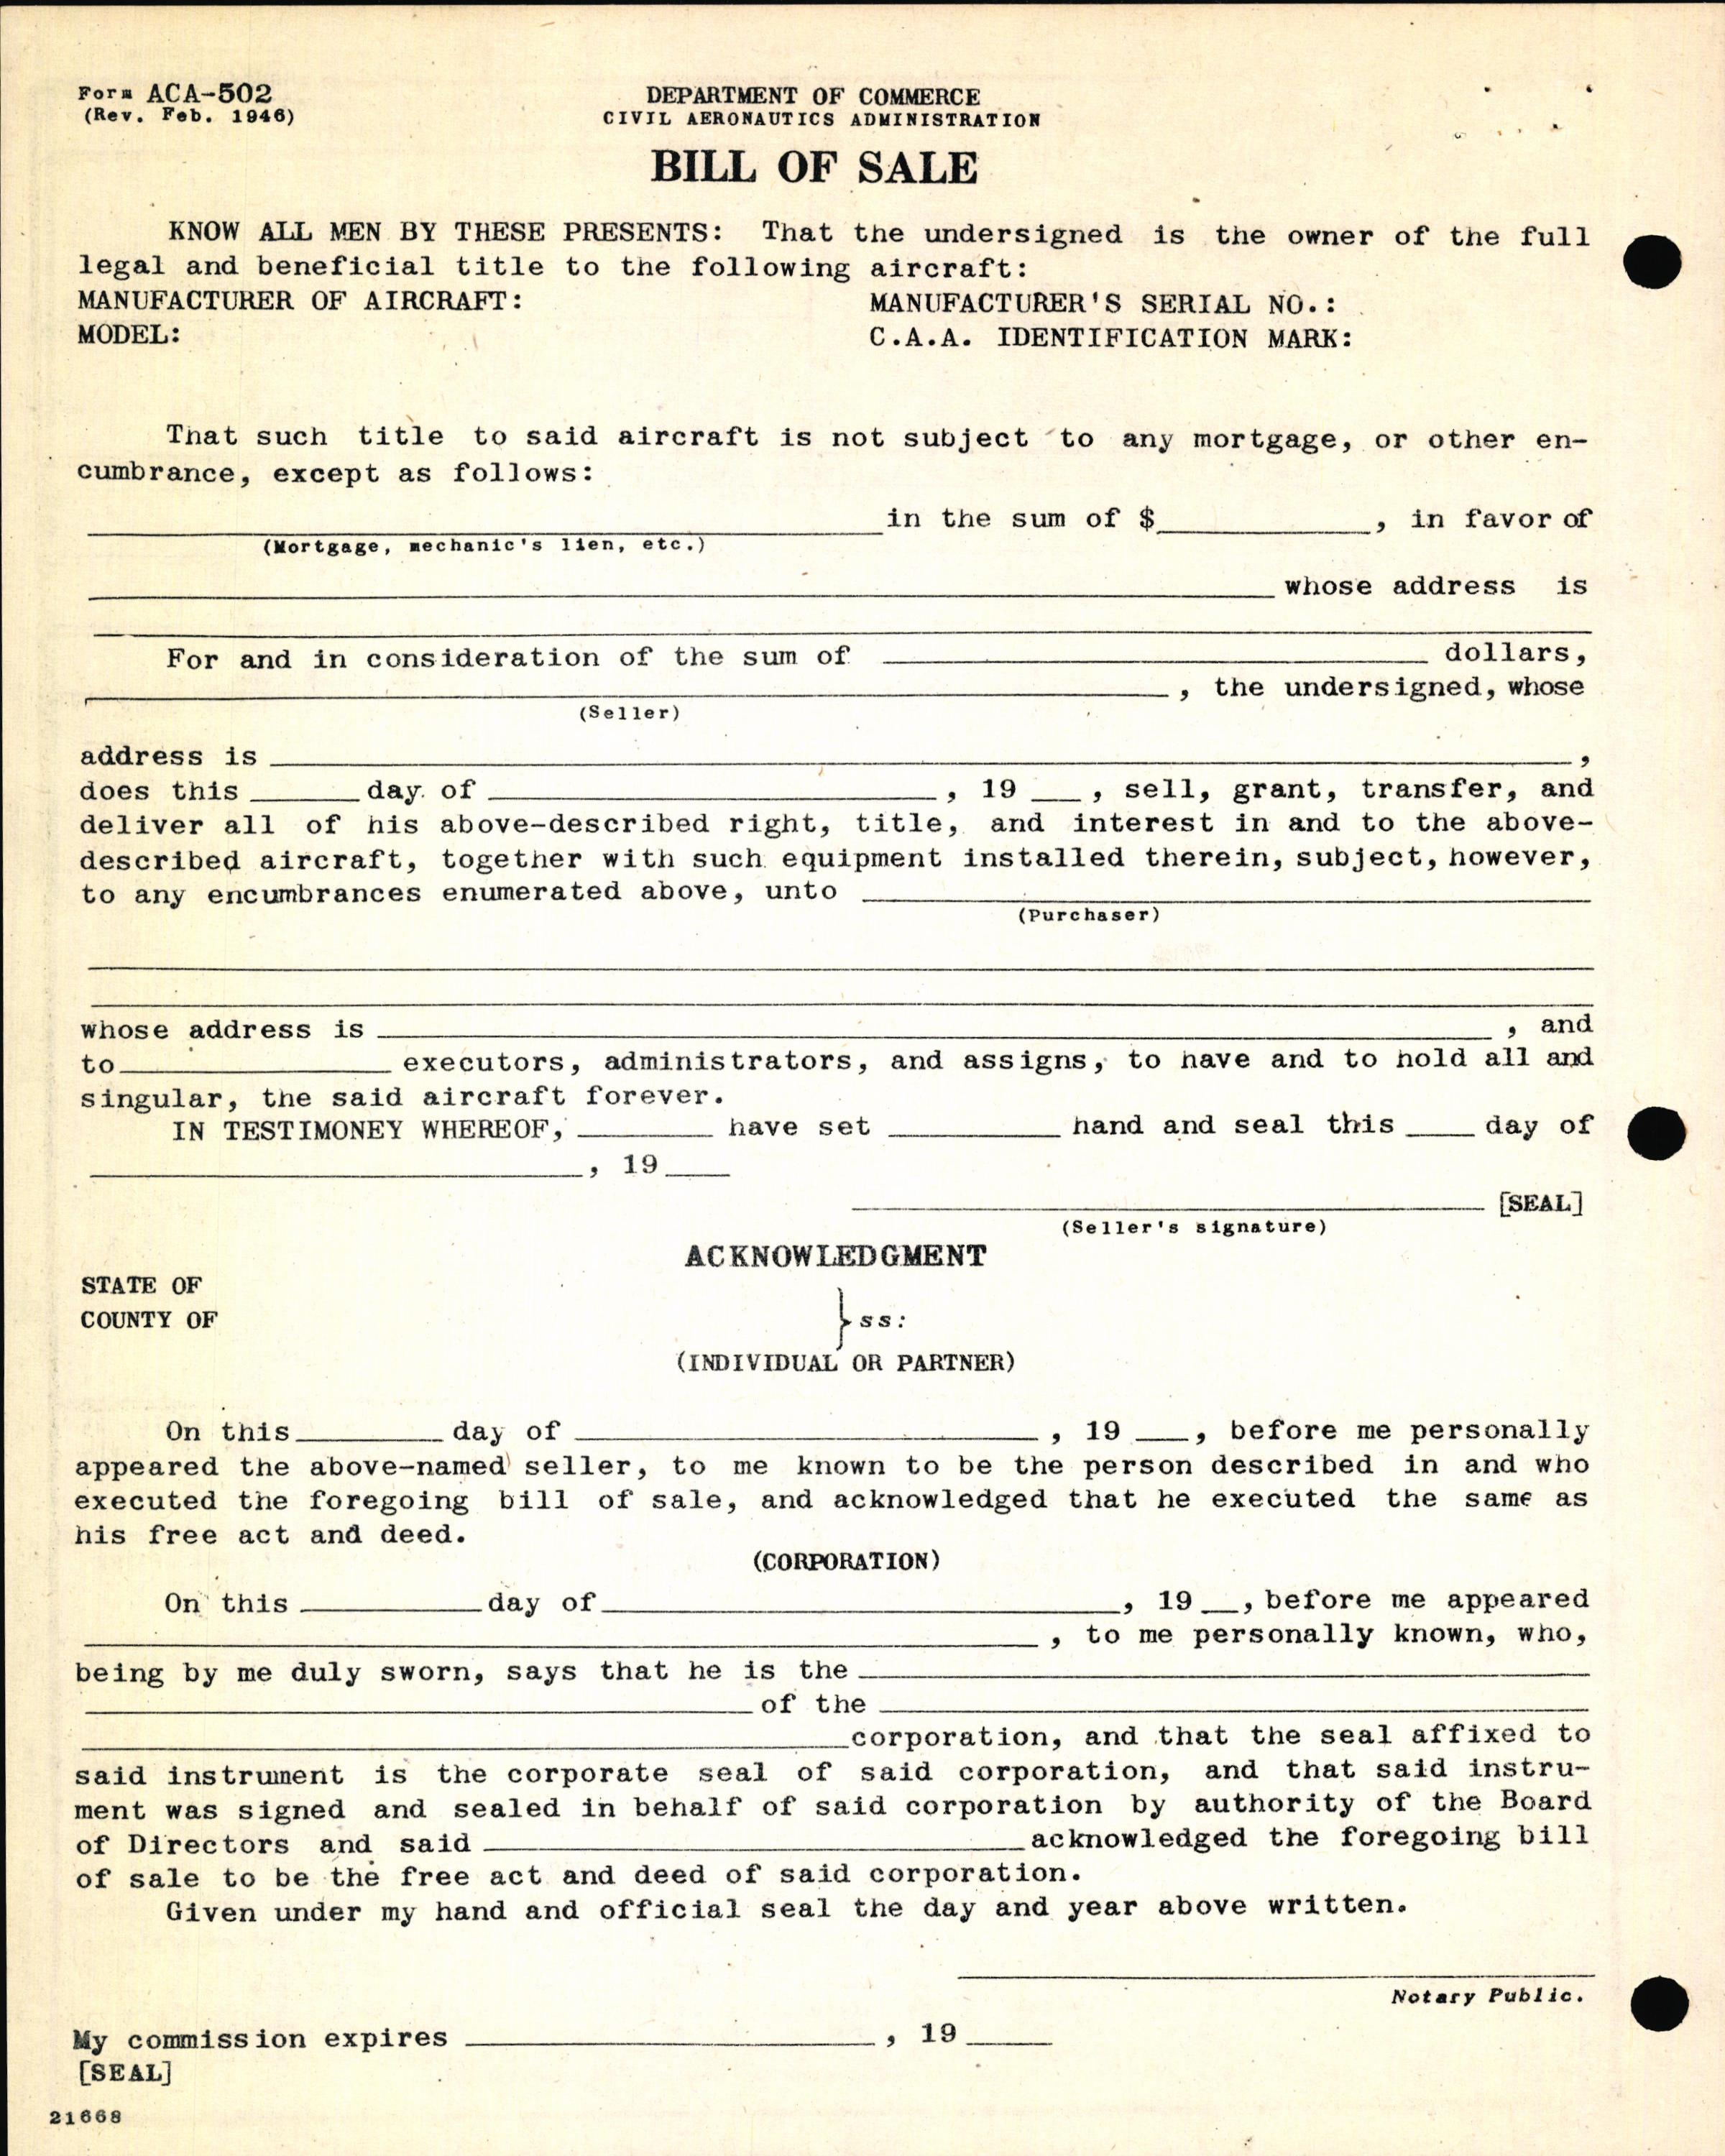 Sample page 6 from AirCorps Library document: Technical Information for Serial Number 1245